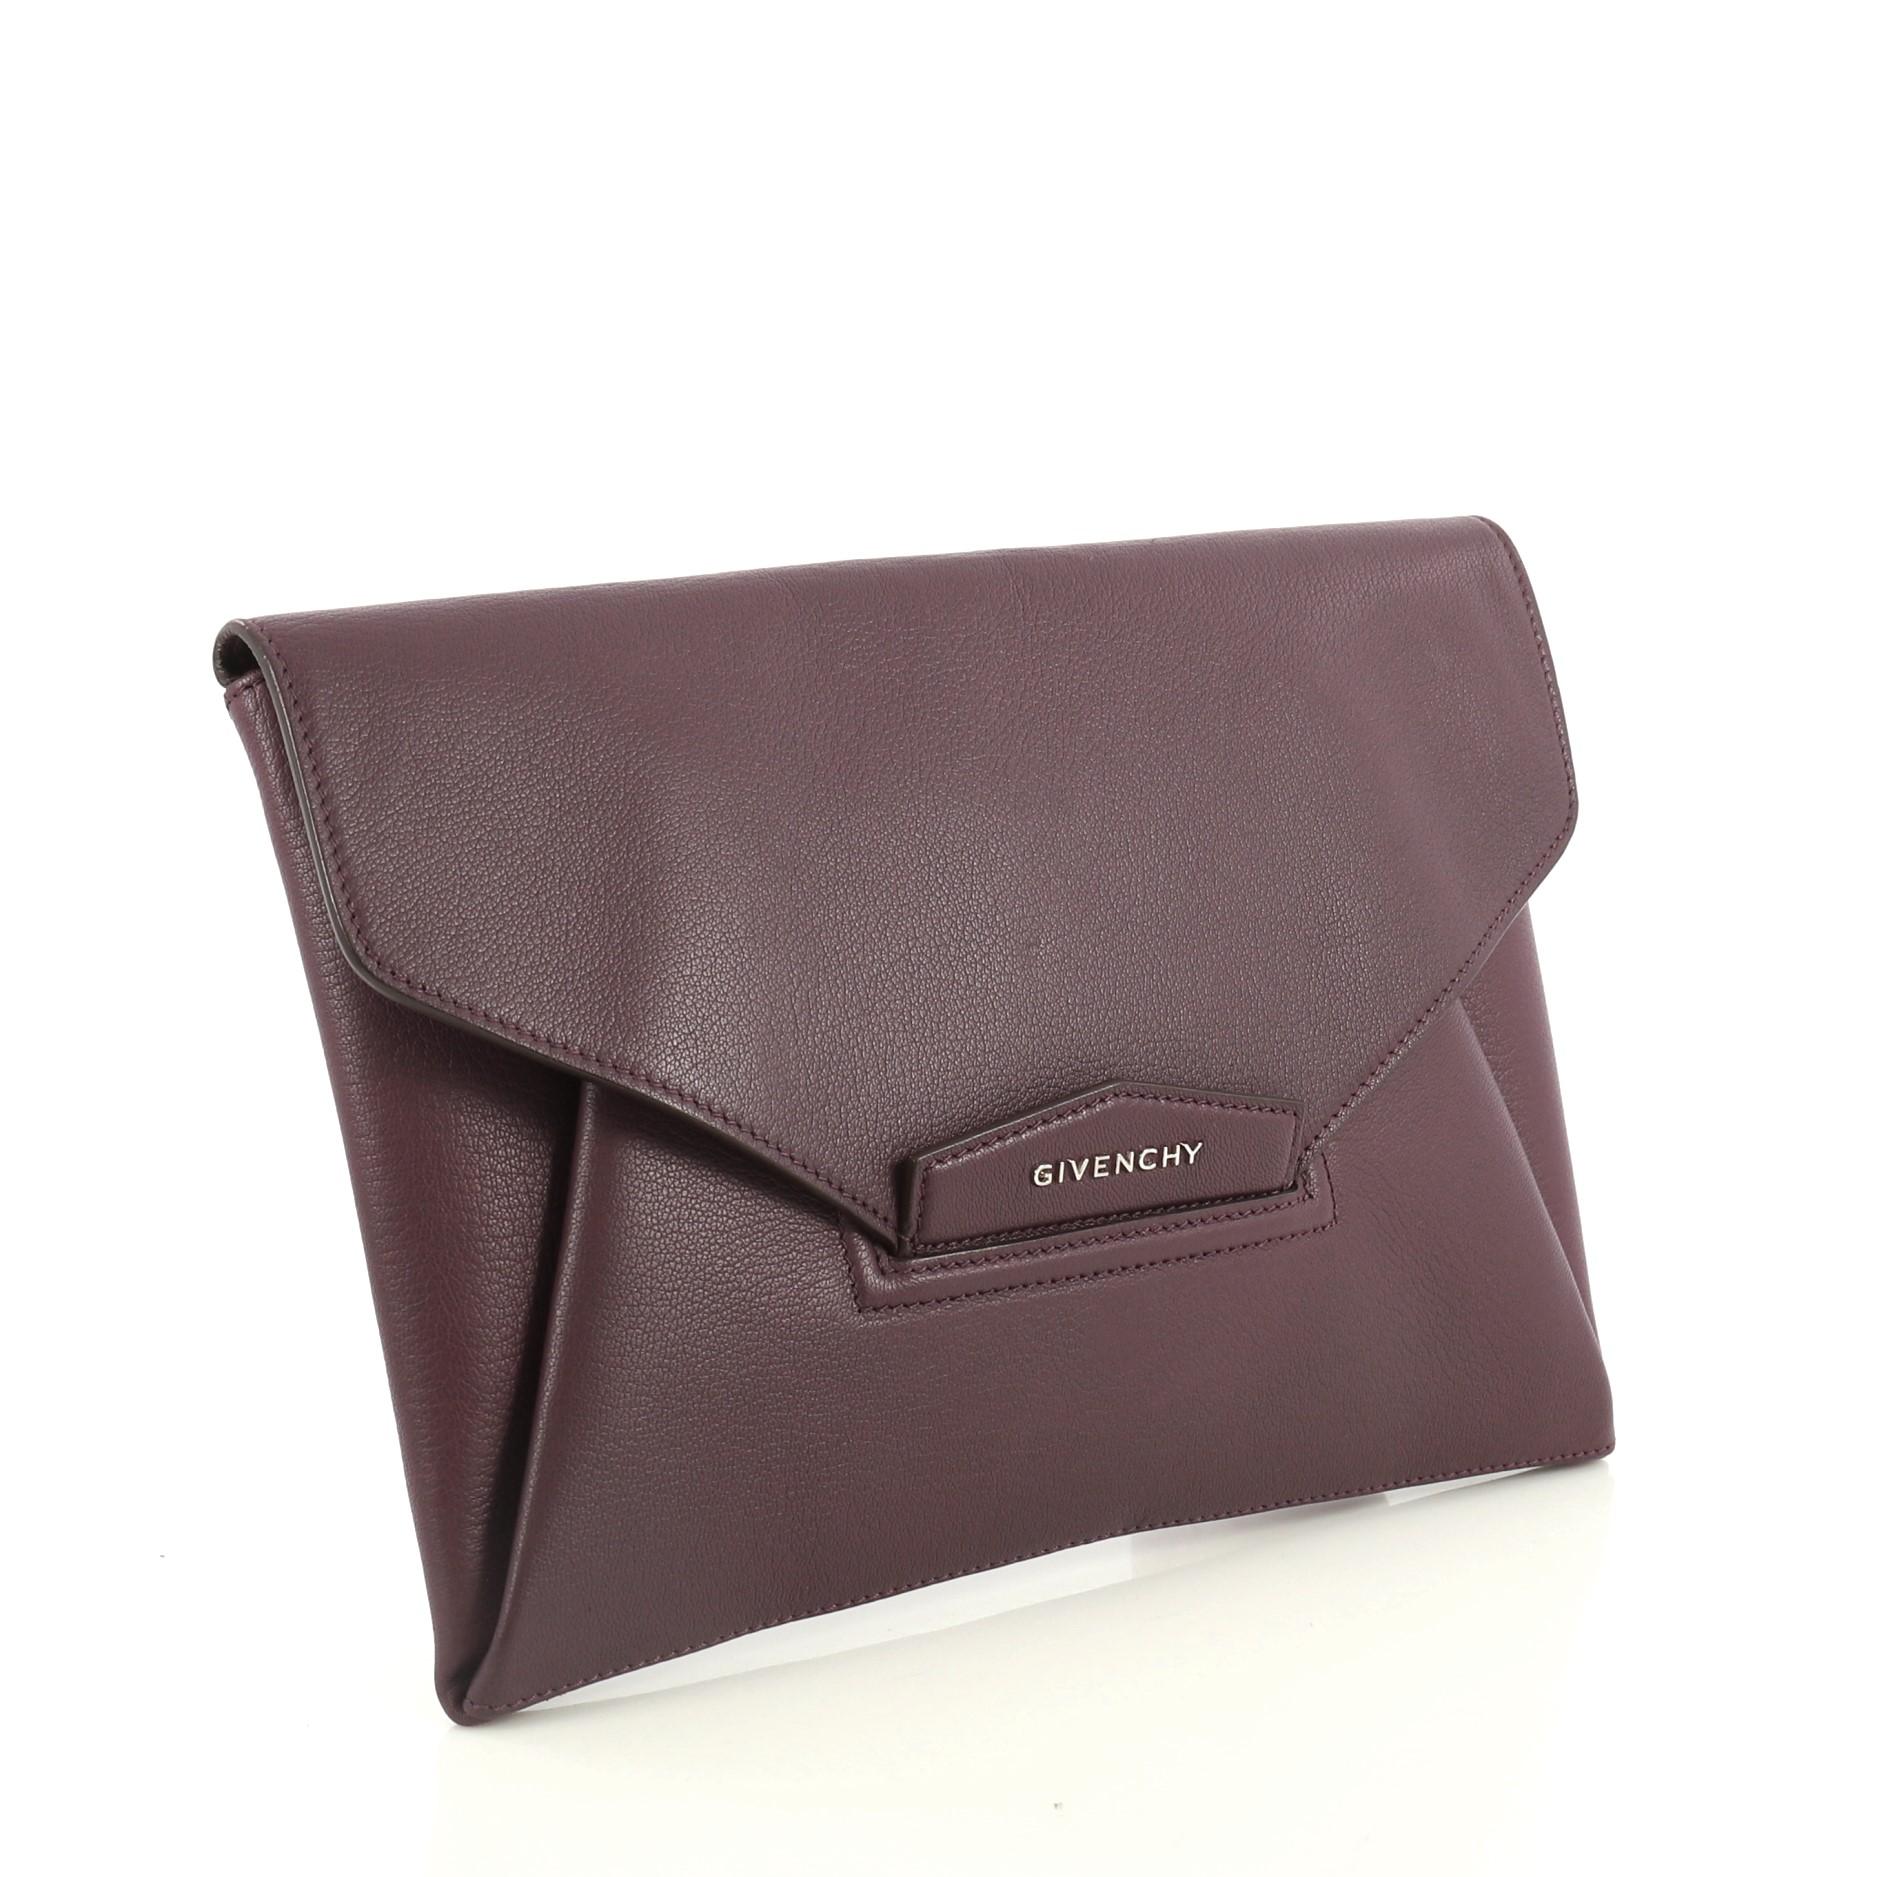 This Givenchy Antigona Envelope Clutch Leather Medium, crafted in purple leather, features an envelope flap top with raised Givenchy logo, magnetic flap that tucks into slot, and silver-tone hardware. Its flap opens to a neutral fabric interior